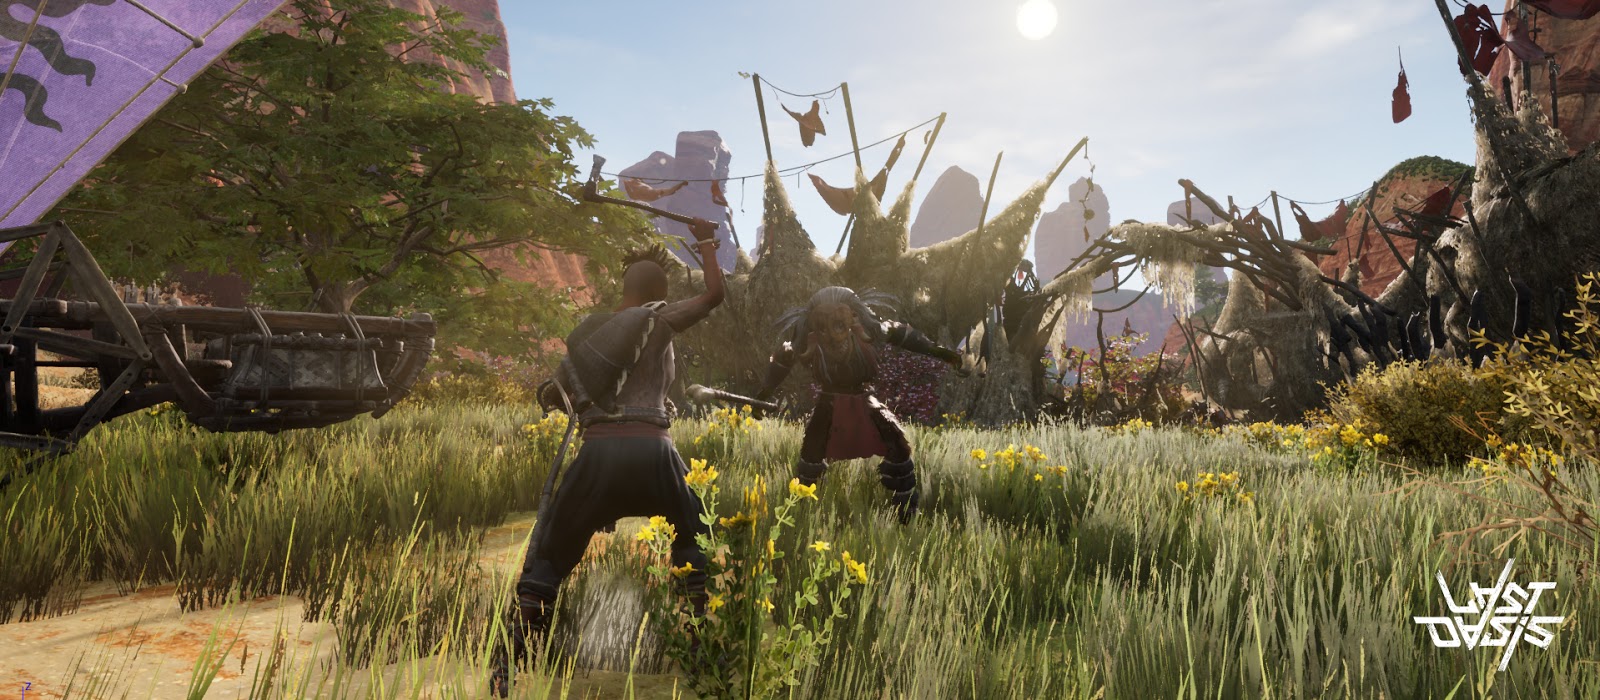 LAST OASIS Nomadic Survival MMO Wants You to Join its Closed Beta